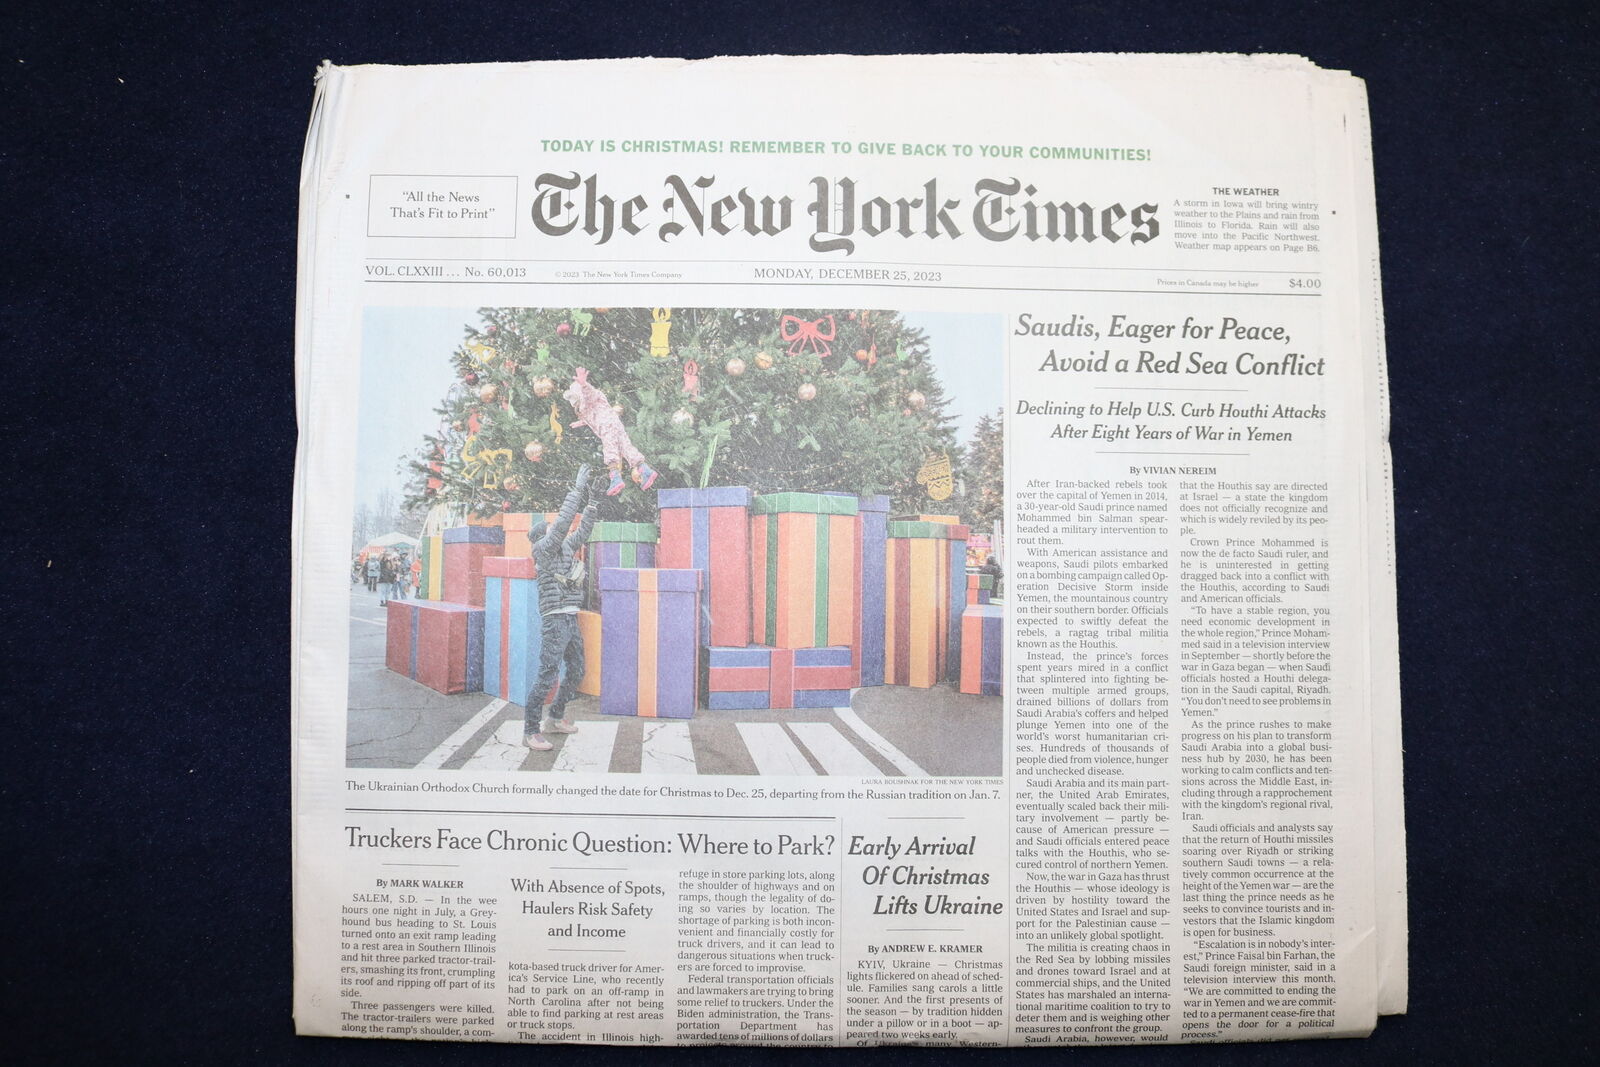 2023 DECEMBER 25 NEW YORK TIMES -SAUDIS, EAGER FOR PEACE, AVOID RED SEA CONFLICT